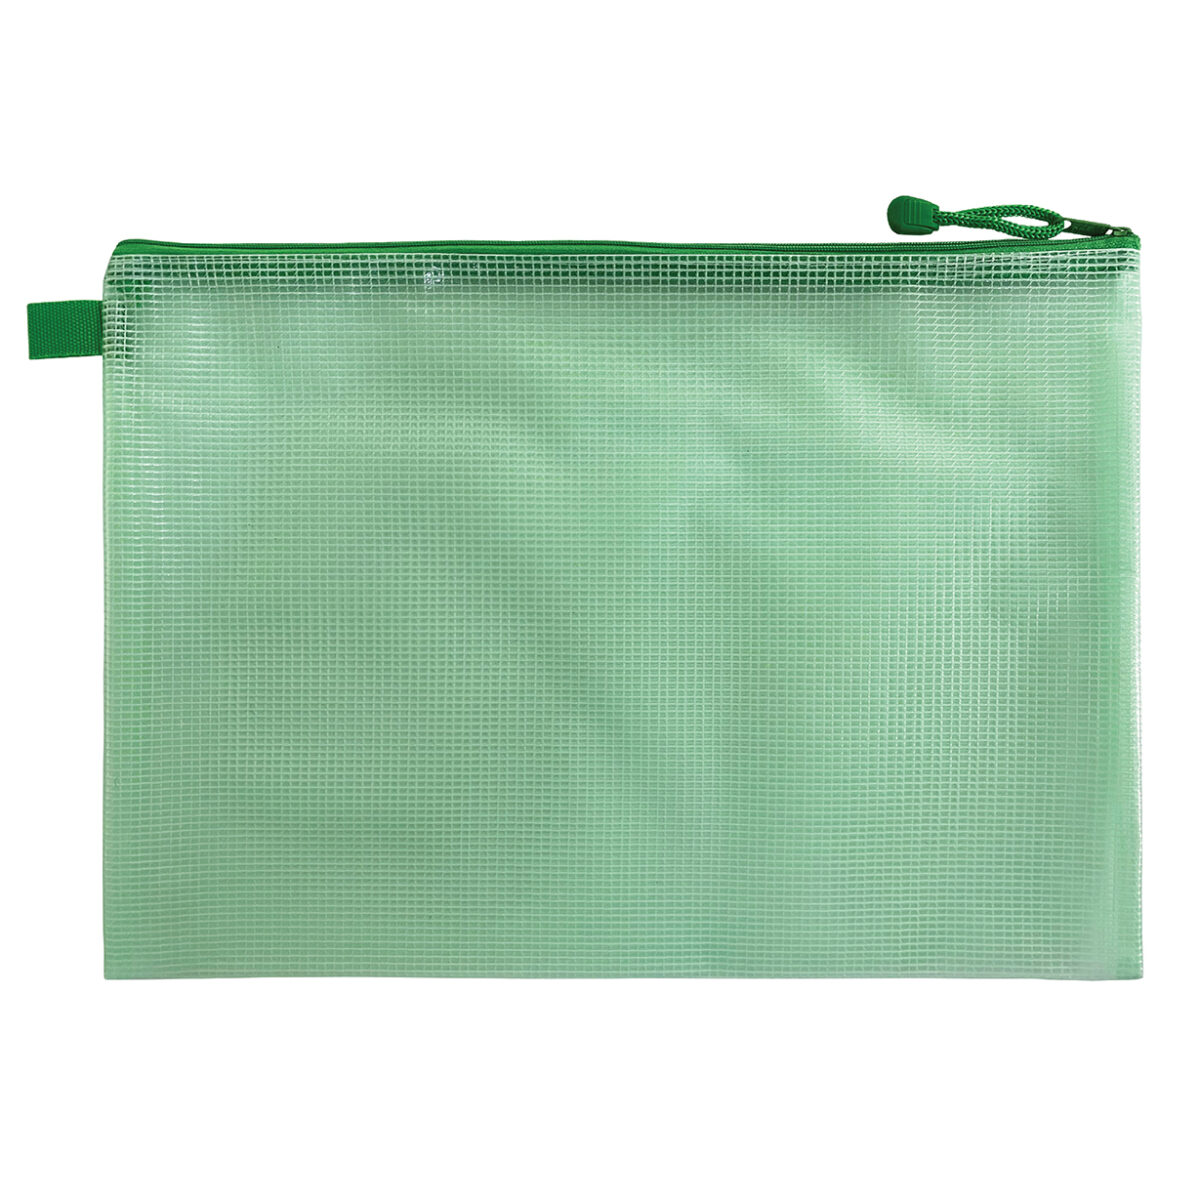 Translucent Mesh Bag/ Mesh Pouch with Zipper